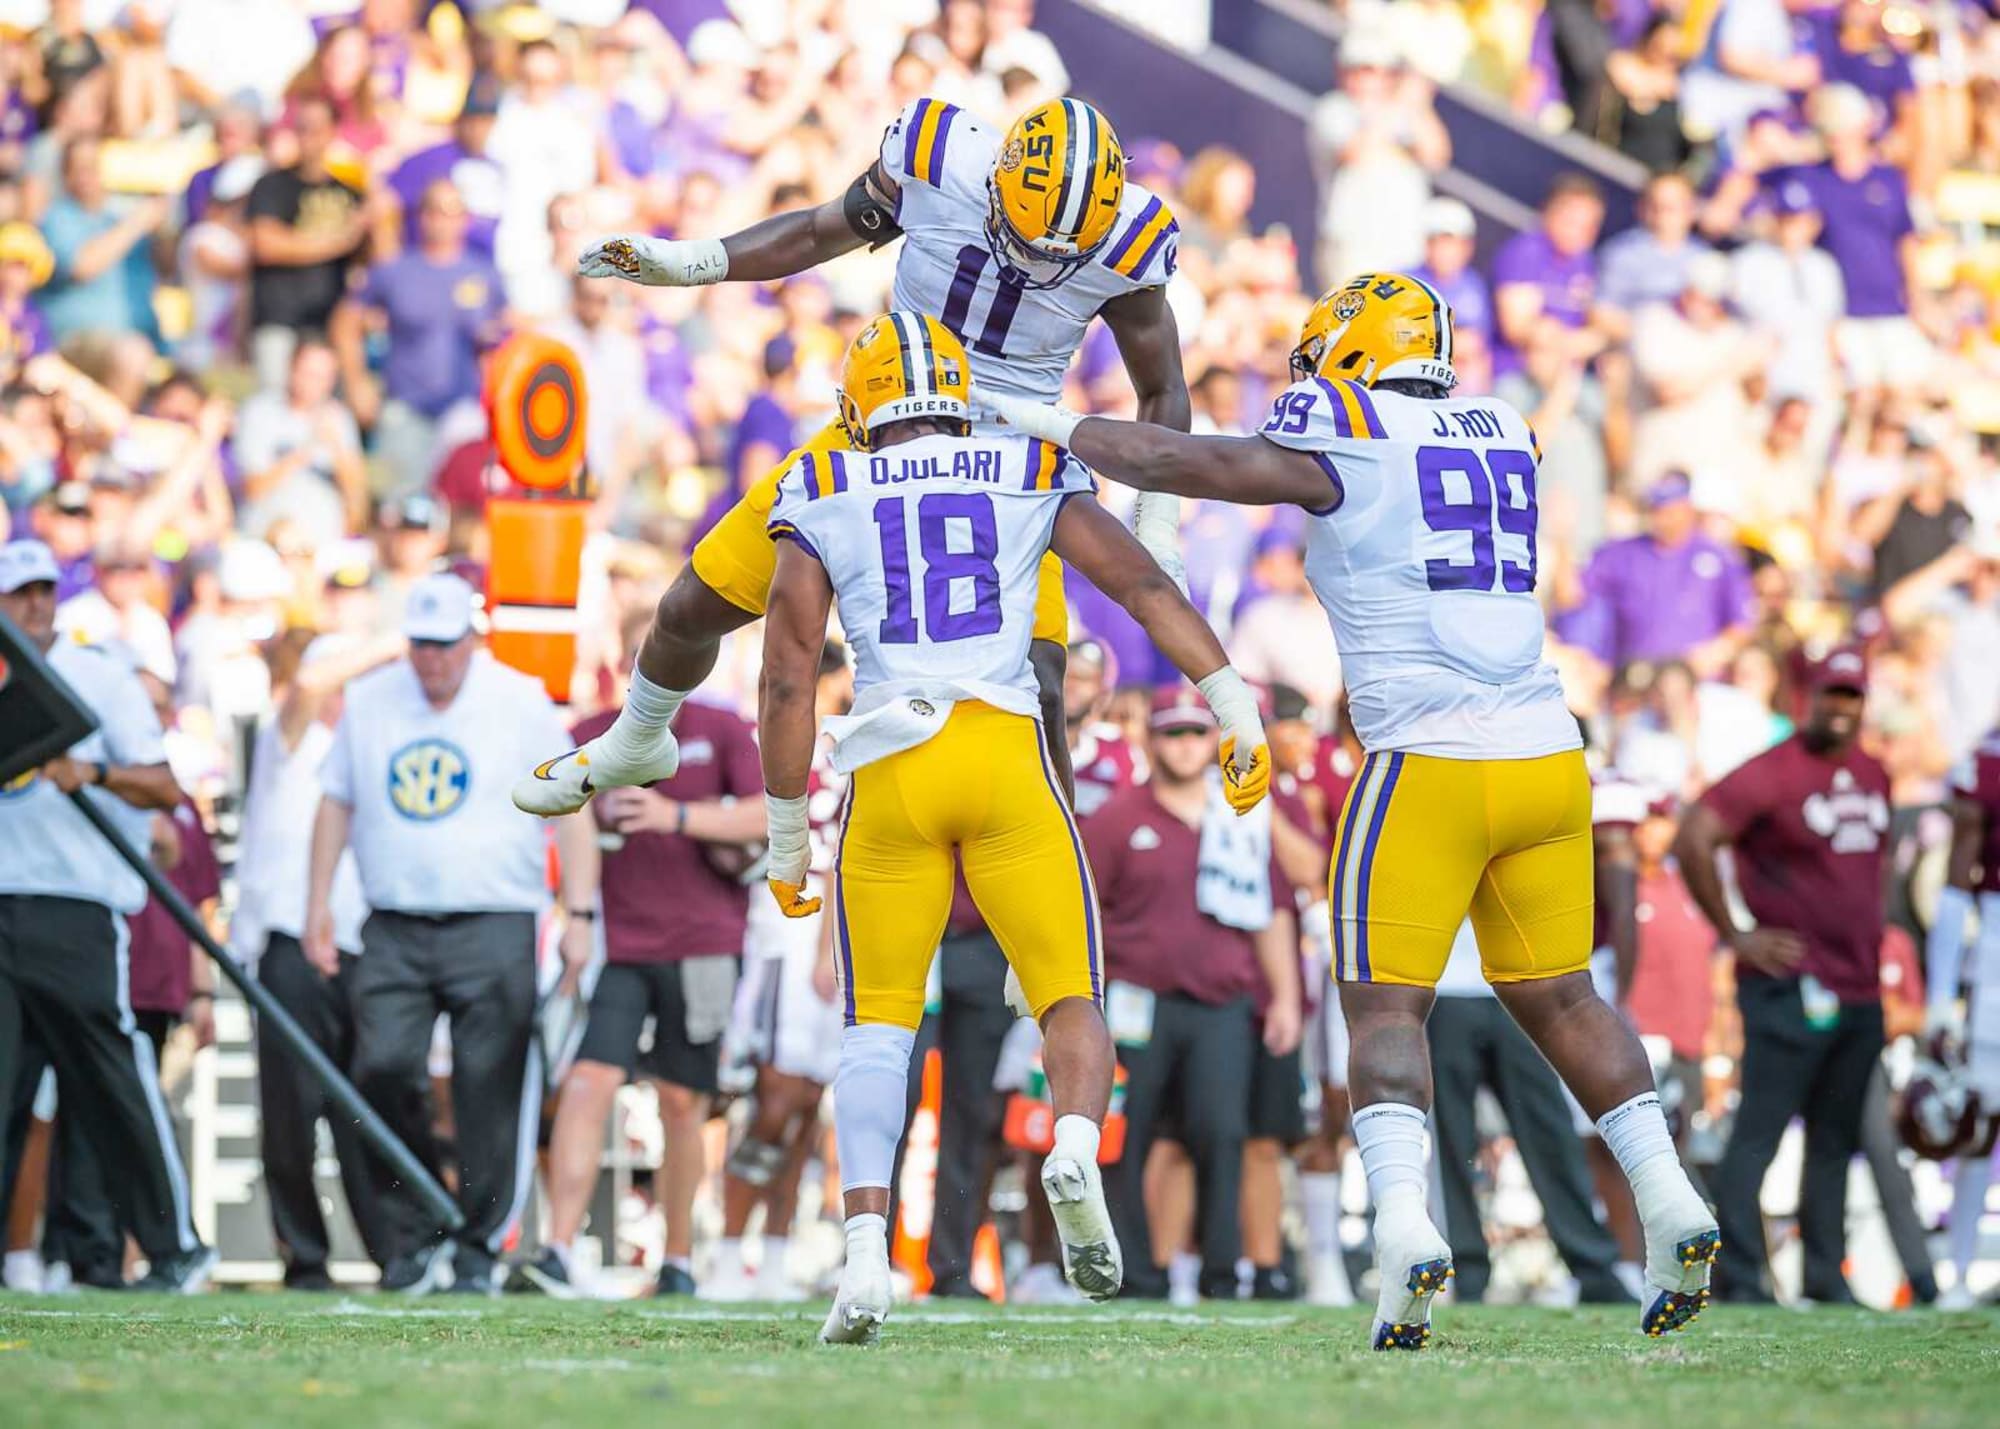 LSU football powers past Mississippi State with second half surge